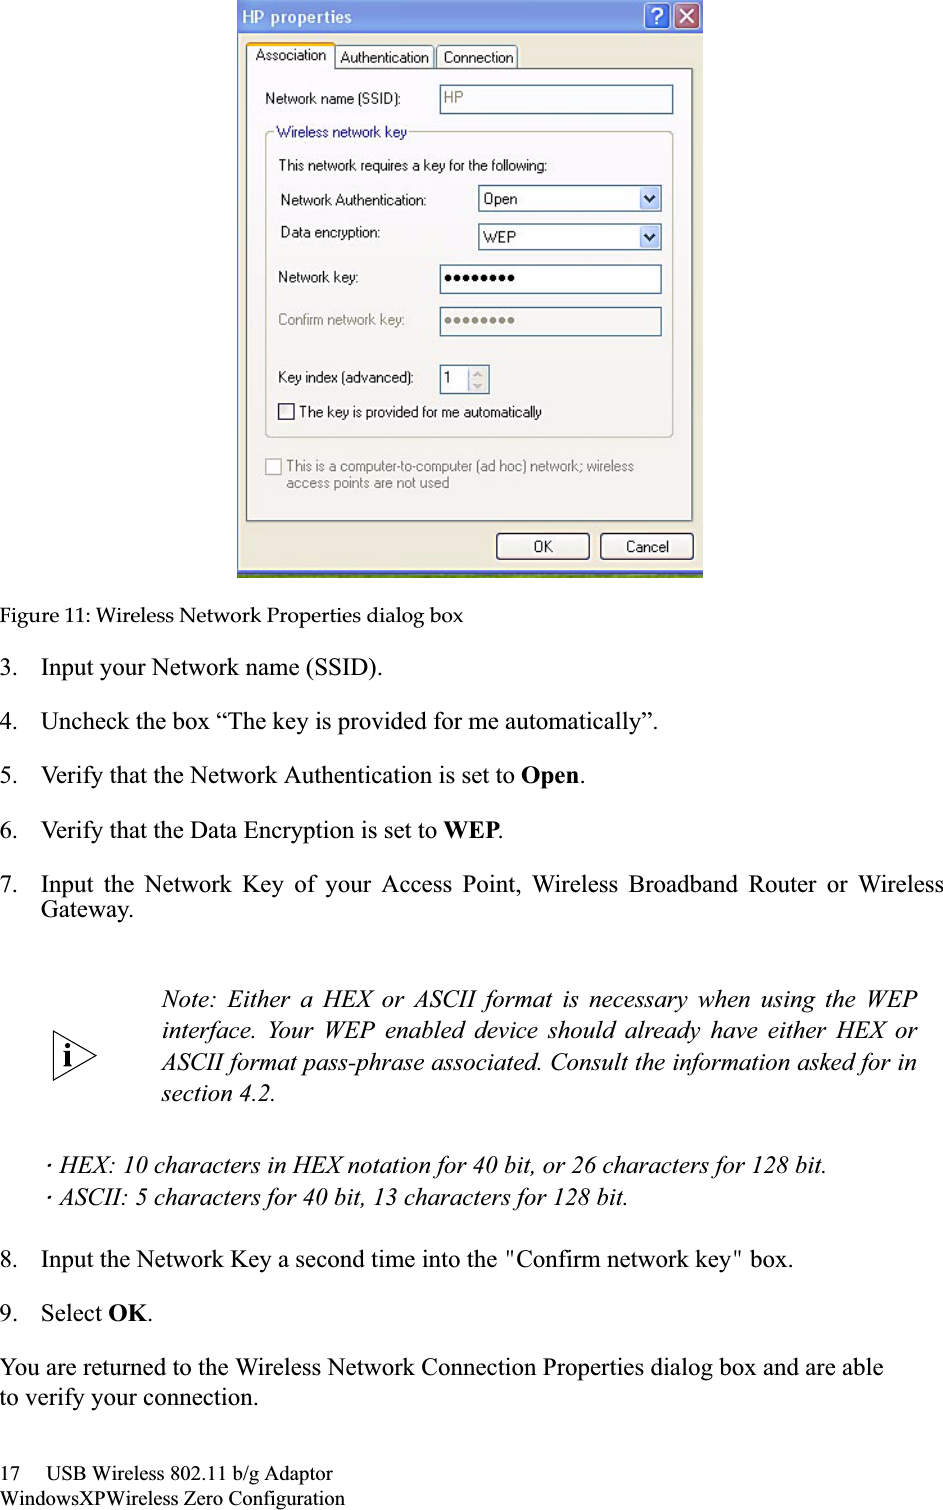 17     USB Wireless 802.11 b/g AdaptorWindowsXPWireless Zero ConfigurationFigureȱ11:ȱWirelessȱNetworkȱPropertiesȱdialogȱbox3. Input your Network name (SSID).4. Uncheck the box “The key is provided for me automatically”.5. Verify that the Network Authentication is set to Open.6. Verify that the Data Encryption is set to WEP.7. Input the Network Key of your Access Point, Wireless Broadband Router or WirelessGateway.ΗHEX: 10 characters in HEX notation for 40 bit, or 26 characters for 128 bit.ΗASCII: 5 characters for 40 bit, 13 characters for 128 bit.8. Input the Network Key a second time into the #Confirm network key# box.9. Select OK.You are returned to the Wireless Network Connection Properties dialog box and are ableto verify your connection.Note: Either a HEX or ASCII format is necessary when using the WEPinterface. Your WEP enabled device should already have either HEX orASCII format pass-phrase associated. Consult the information asked for insection 4.2. 